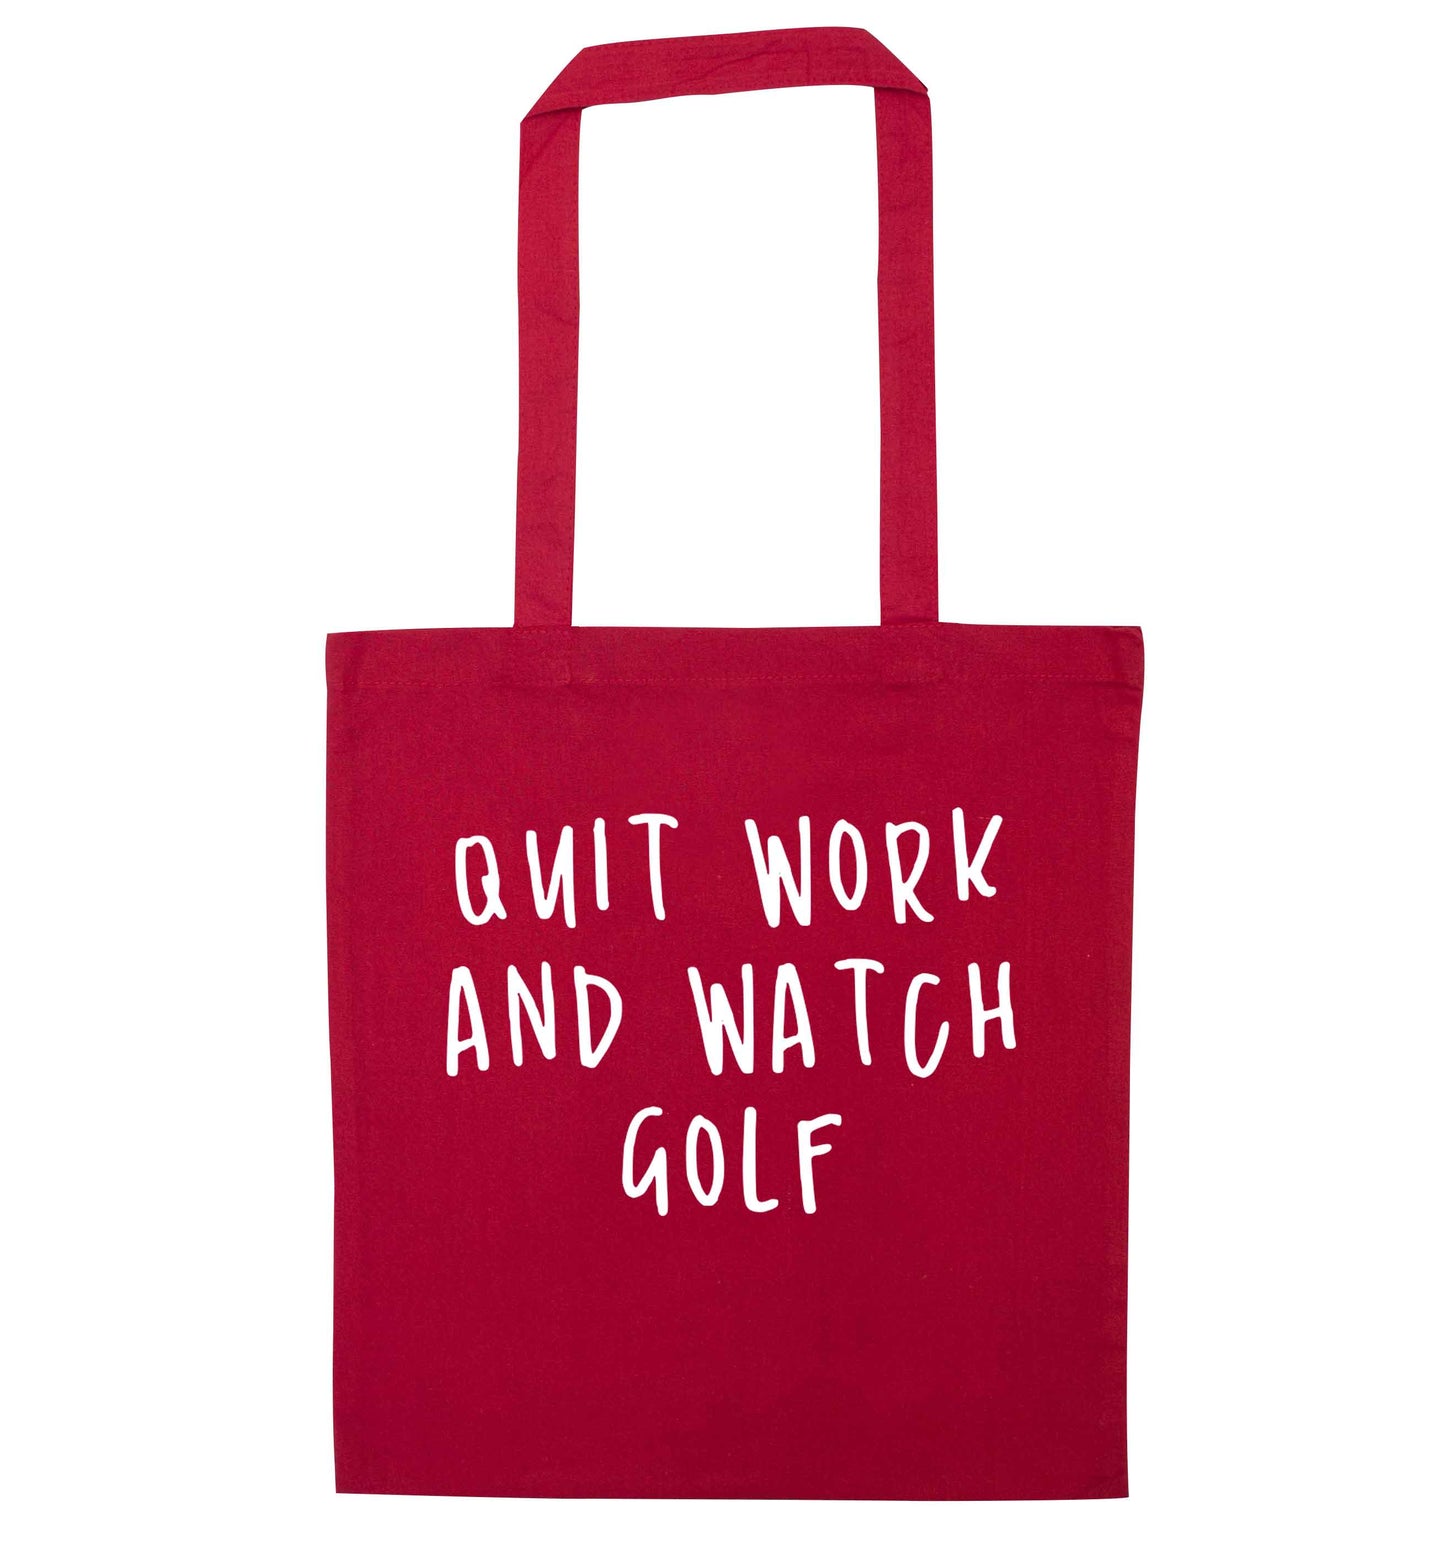 Quit work and watch golf red tote bag